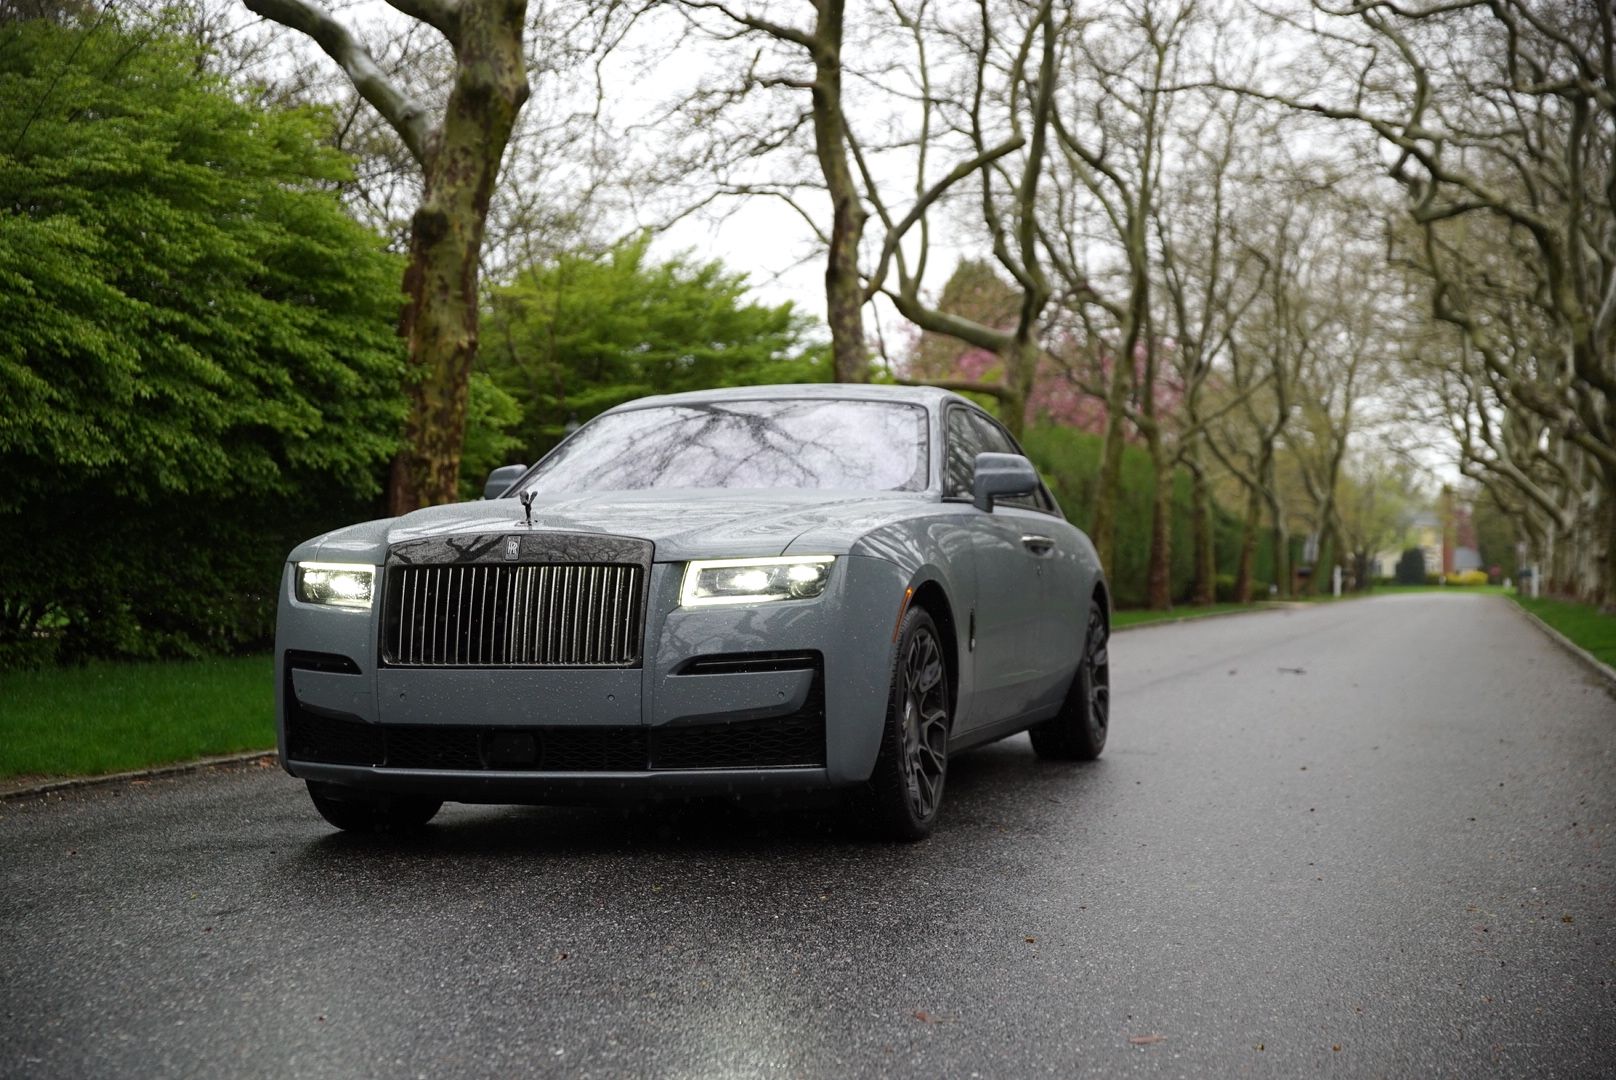 Front angled view of a Rolls Royce Ghost Black Badge